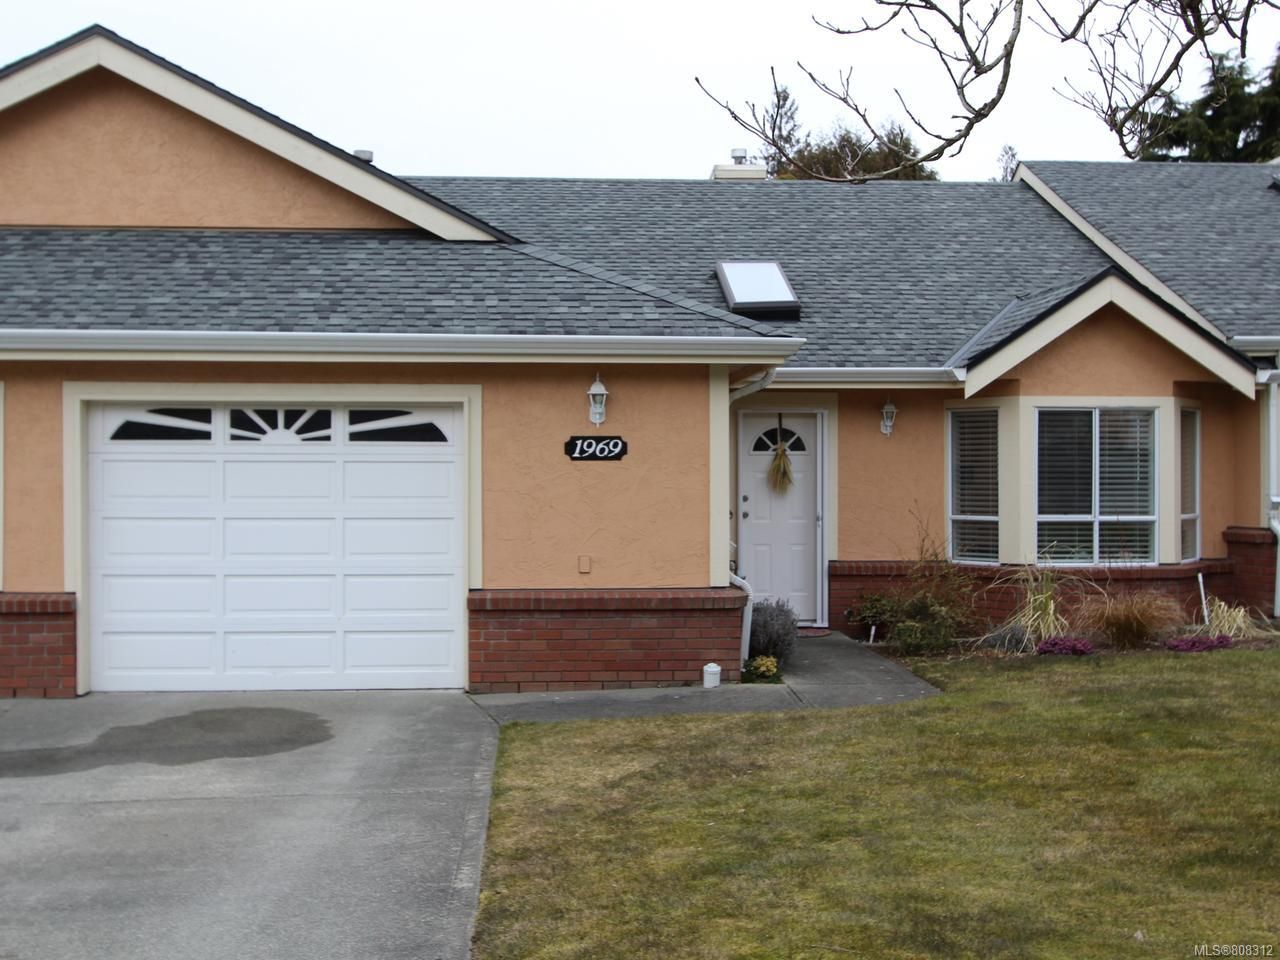 Main Photo: 1969 Bunker Hill Dr in NANAIMO: Na Departure Bay Row/Townhouse for sale (Nanaimo)  : MLS®# 808312